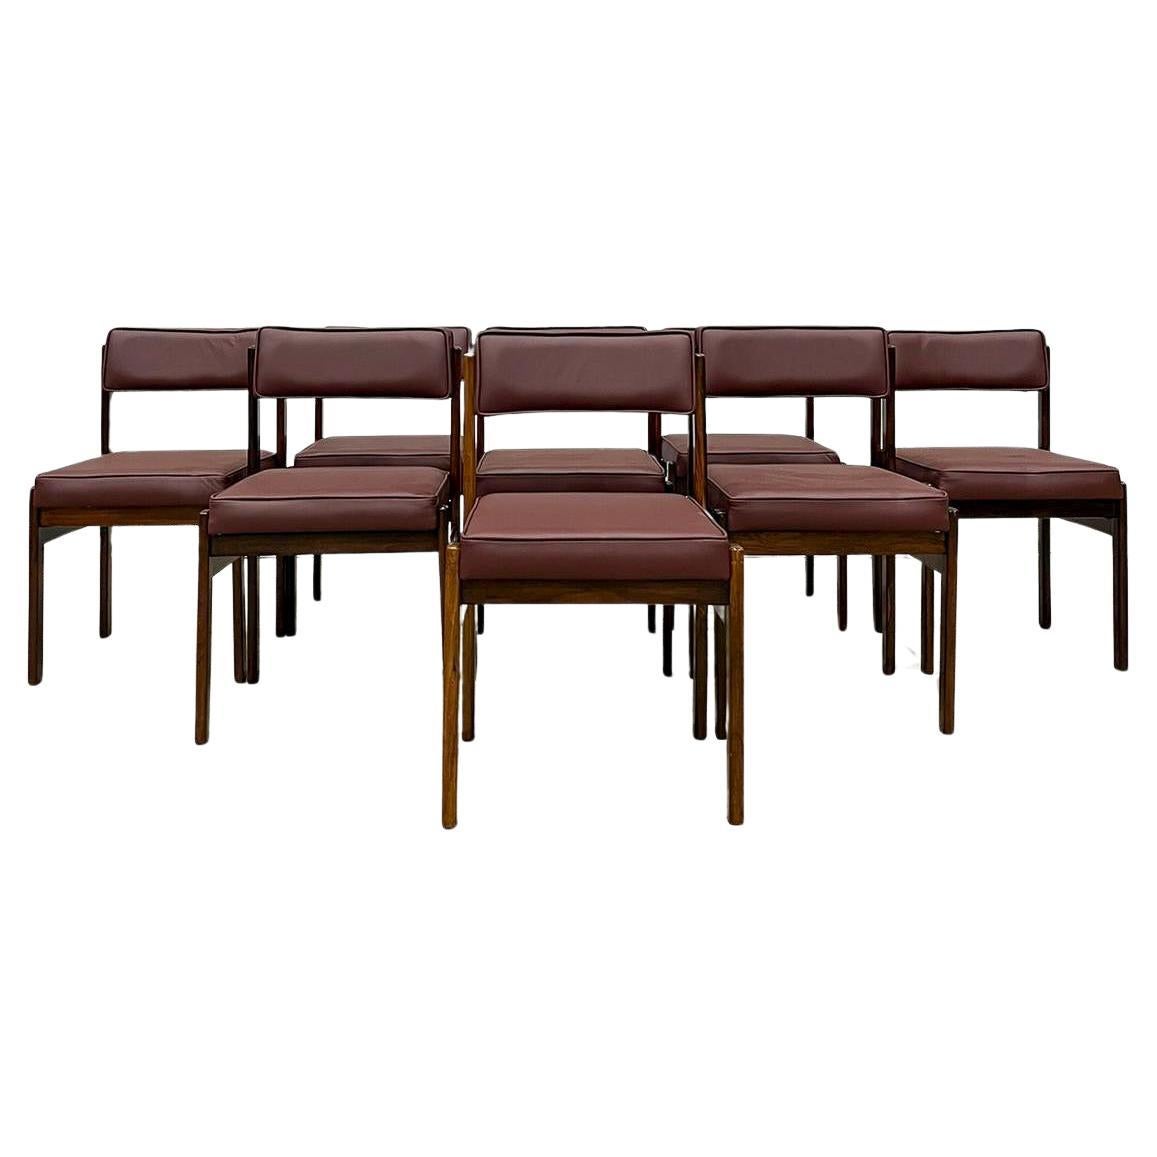 Brazilian Modern "Tião" Dining Chairs in Hardwood, Sergio Rodrigues, 1959 For Sale